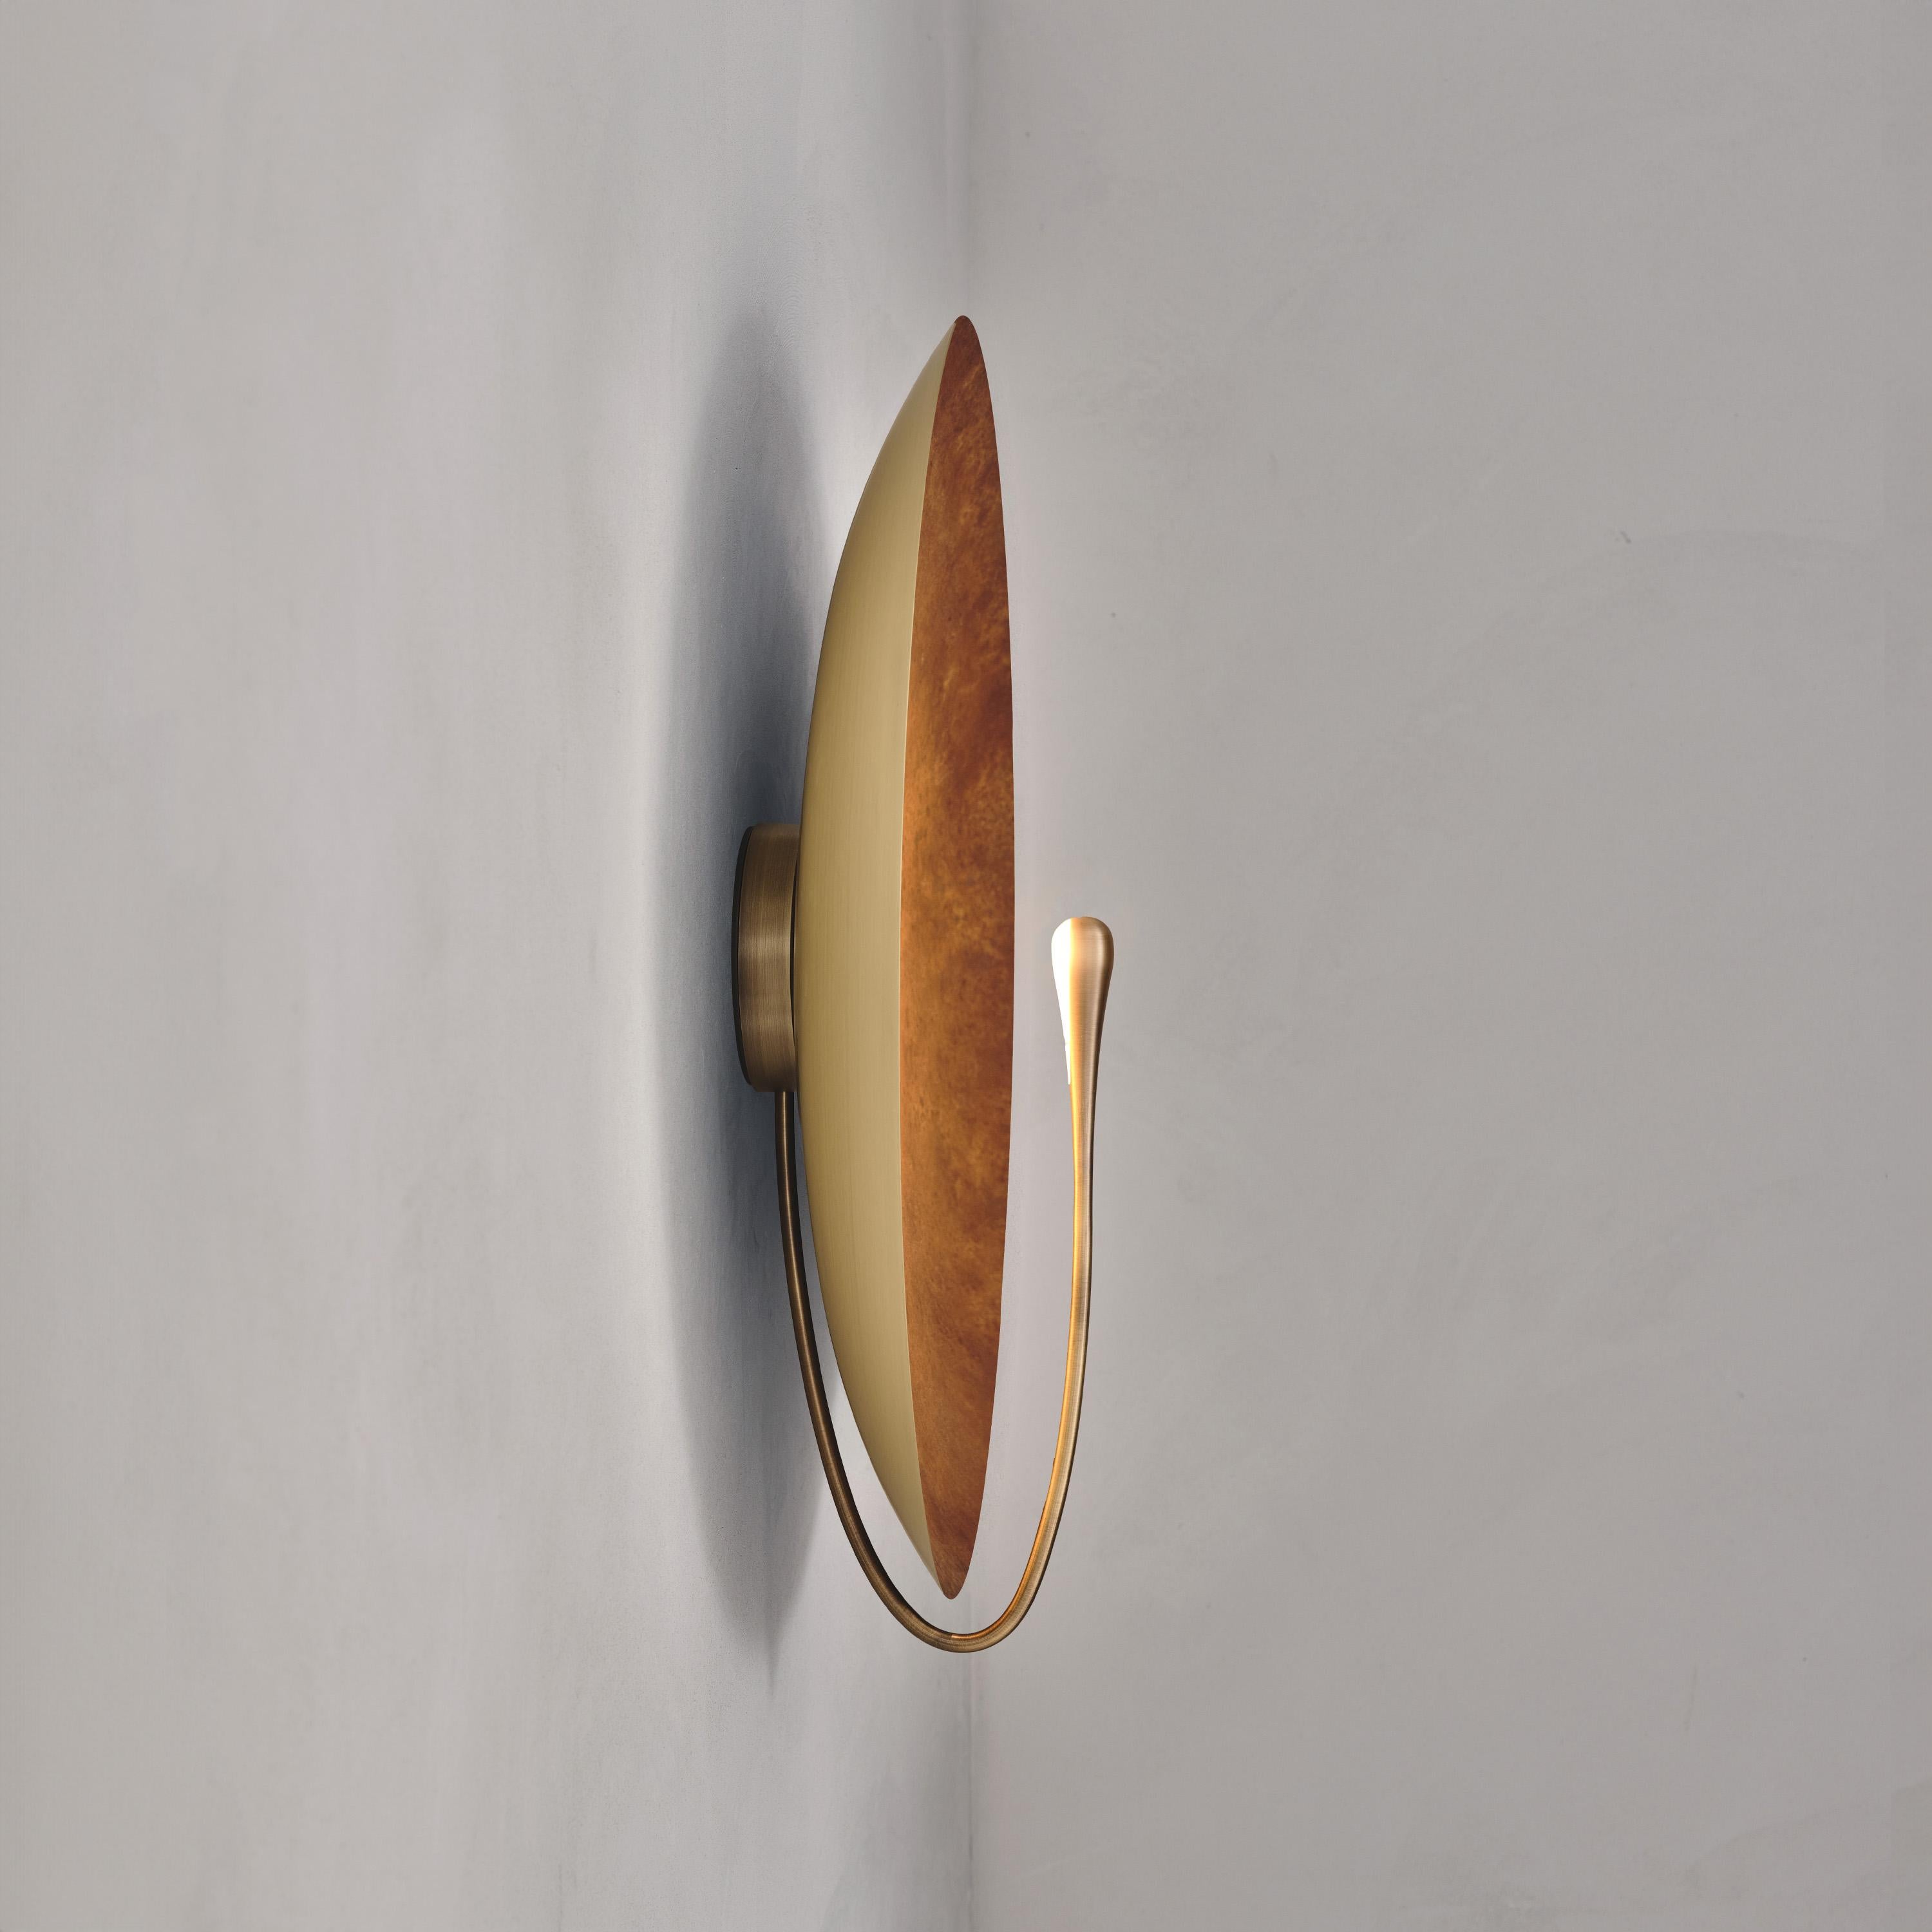 Brushed 'Cosmic Rust XL' Handmade Patinated Brass Contemporary Wall Light Sconce For Sale